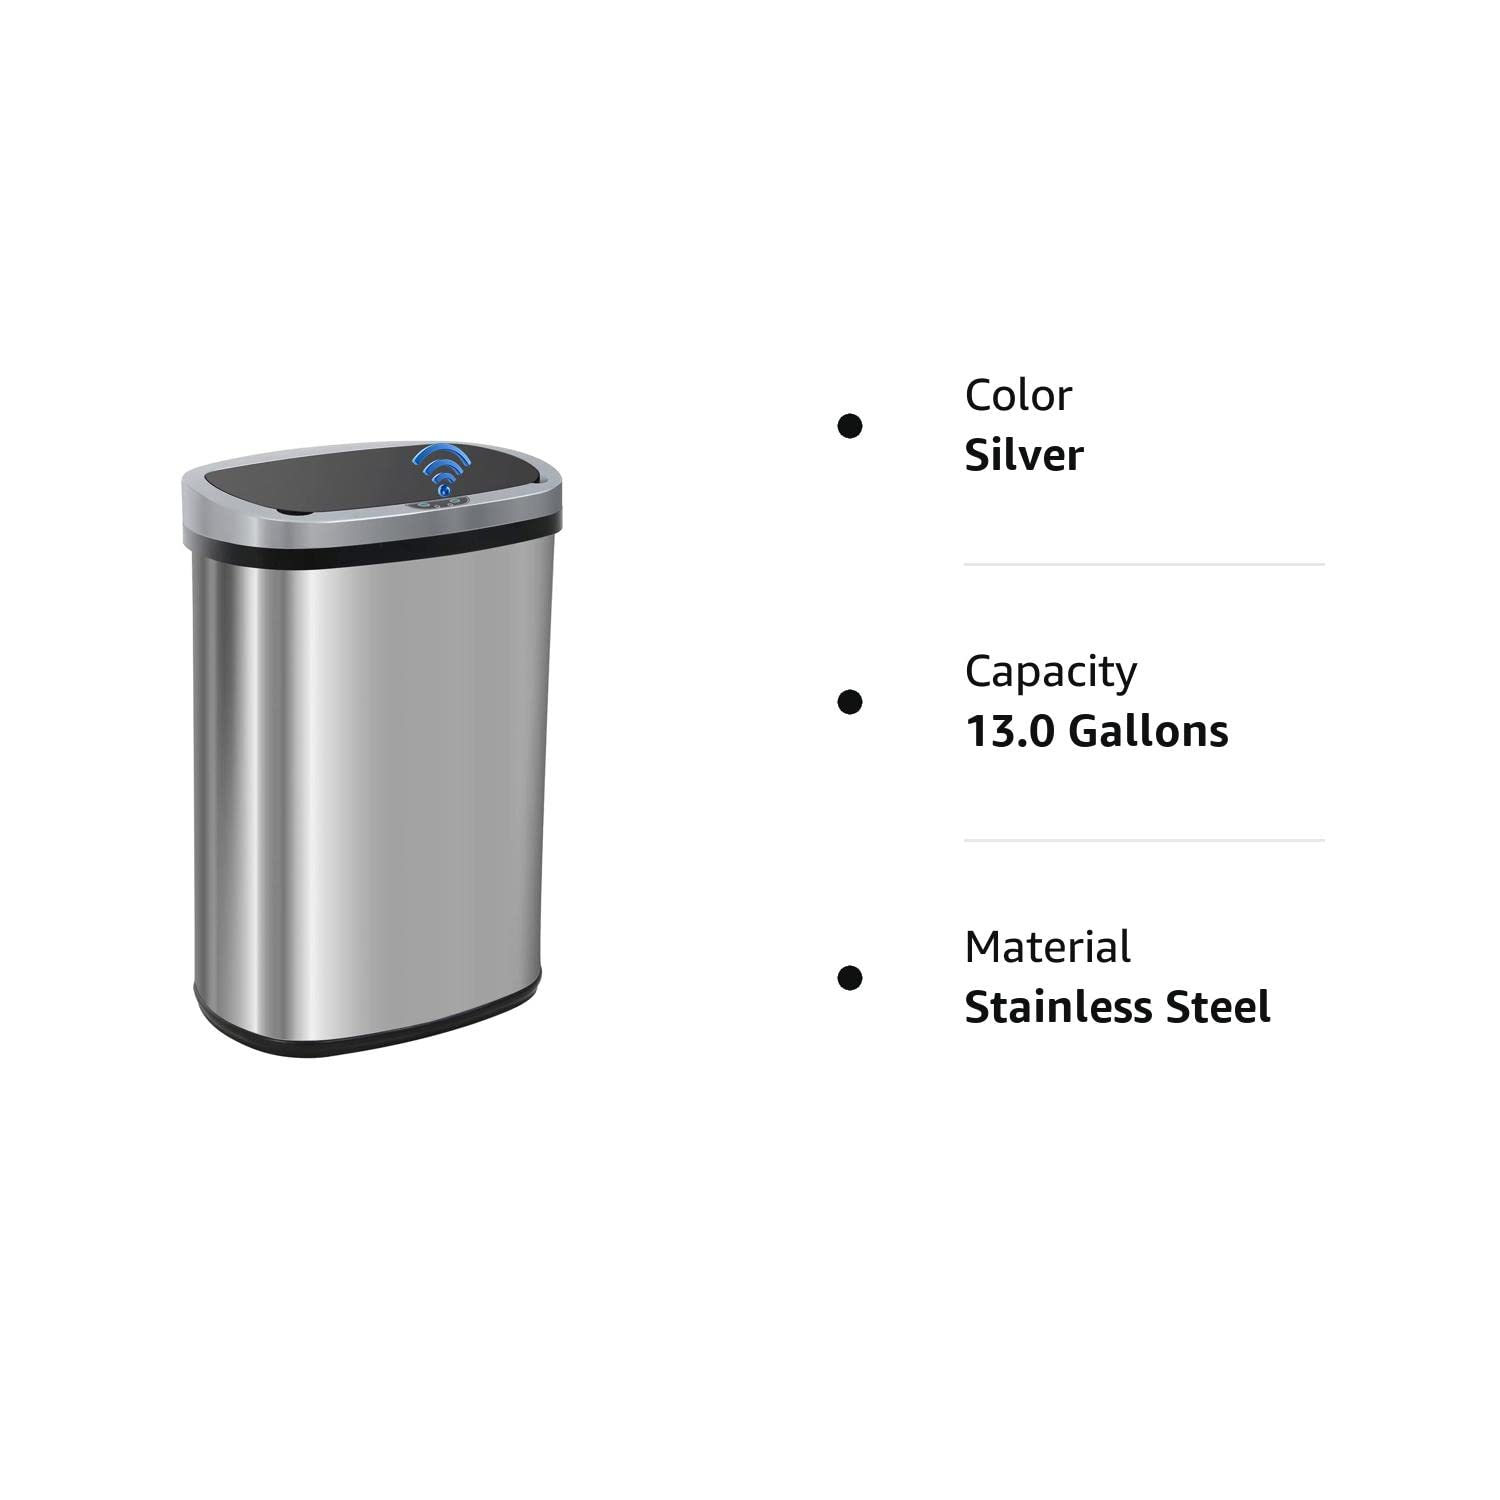 https://bigbigmart.com/wp-content/uploads/2023/07/FDW-Garbage-Can-13-Gallon-50-Liter-Kitchen-Trash-Can-for-Bathroom-Bedroom-Home-Office-Automatic-Touch-Free-High-Capacity-with-Lid-Brushed-Stainless-Steel-Waste-Bin0.jpg